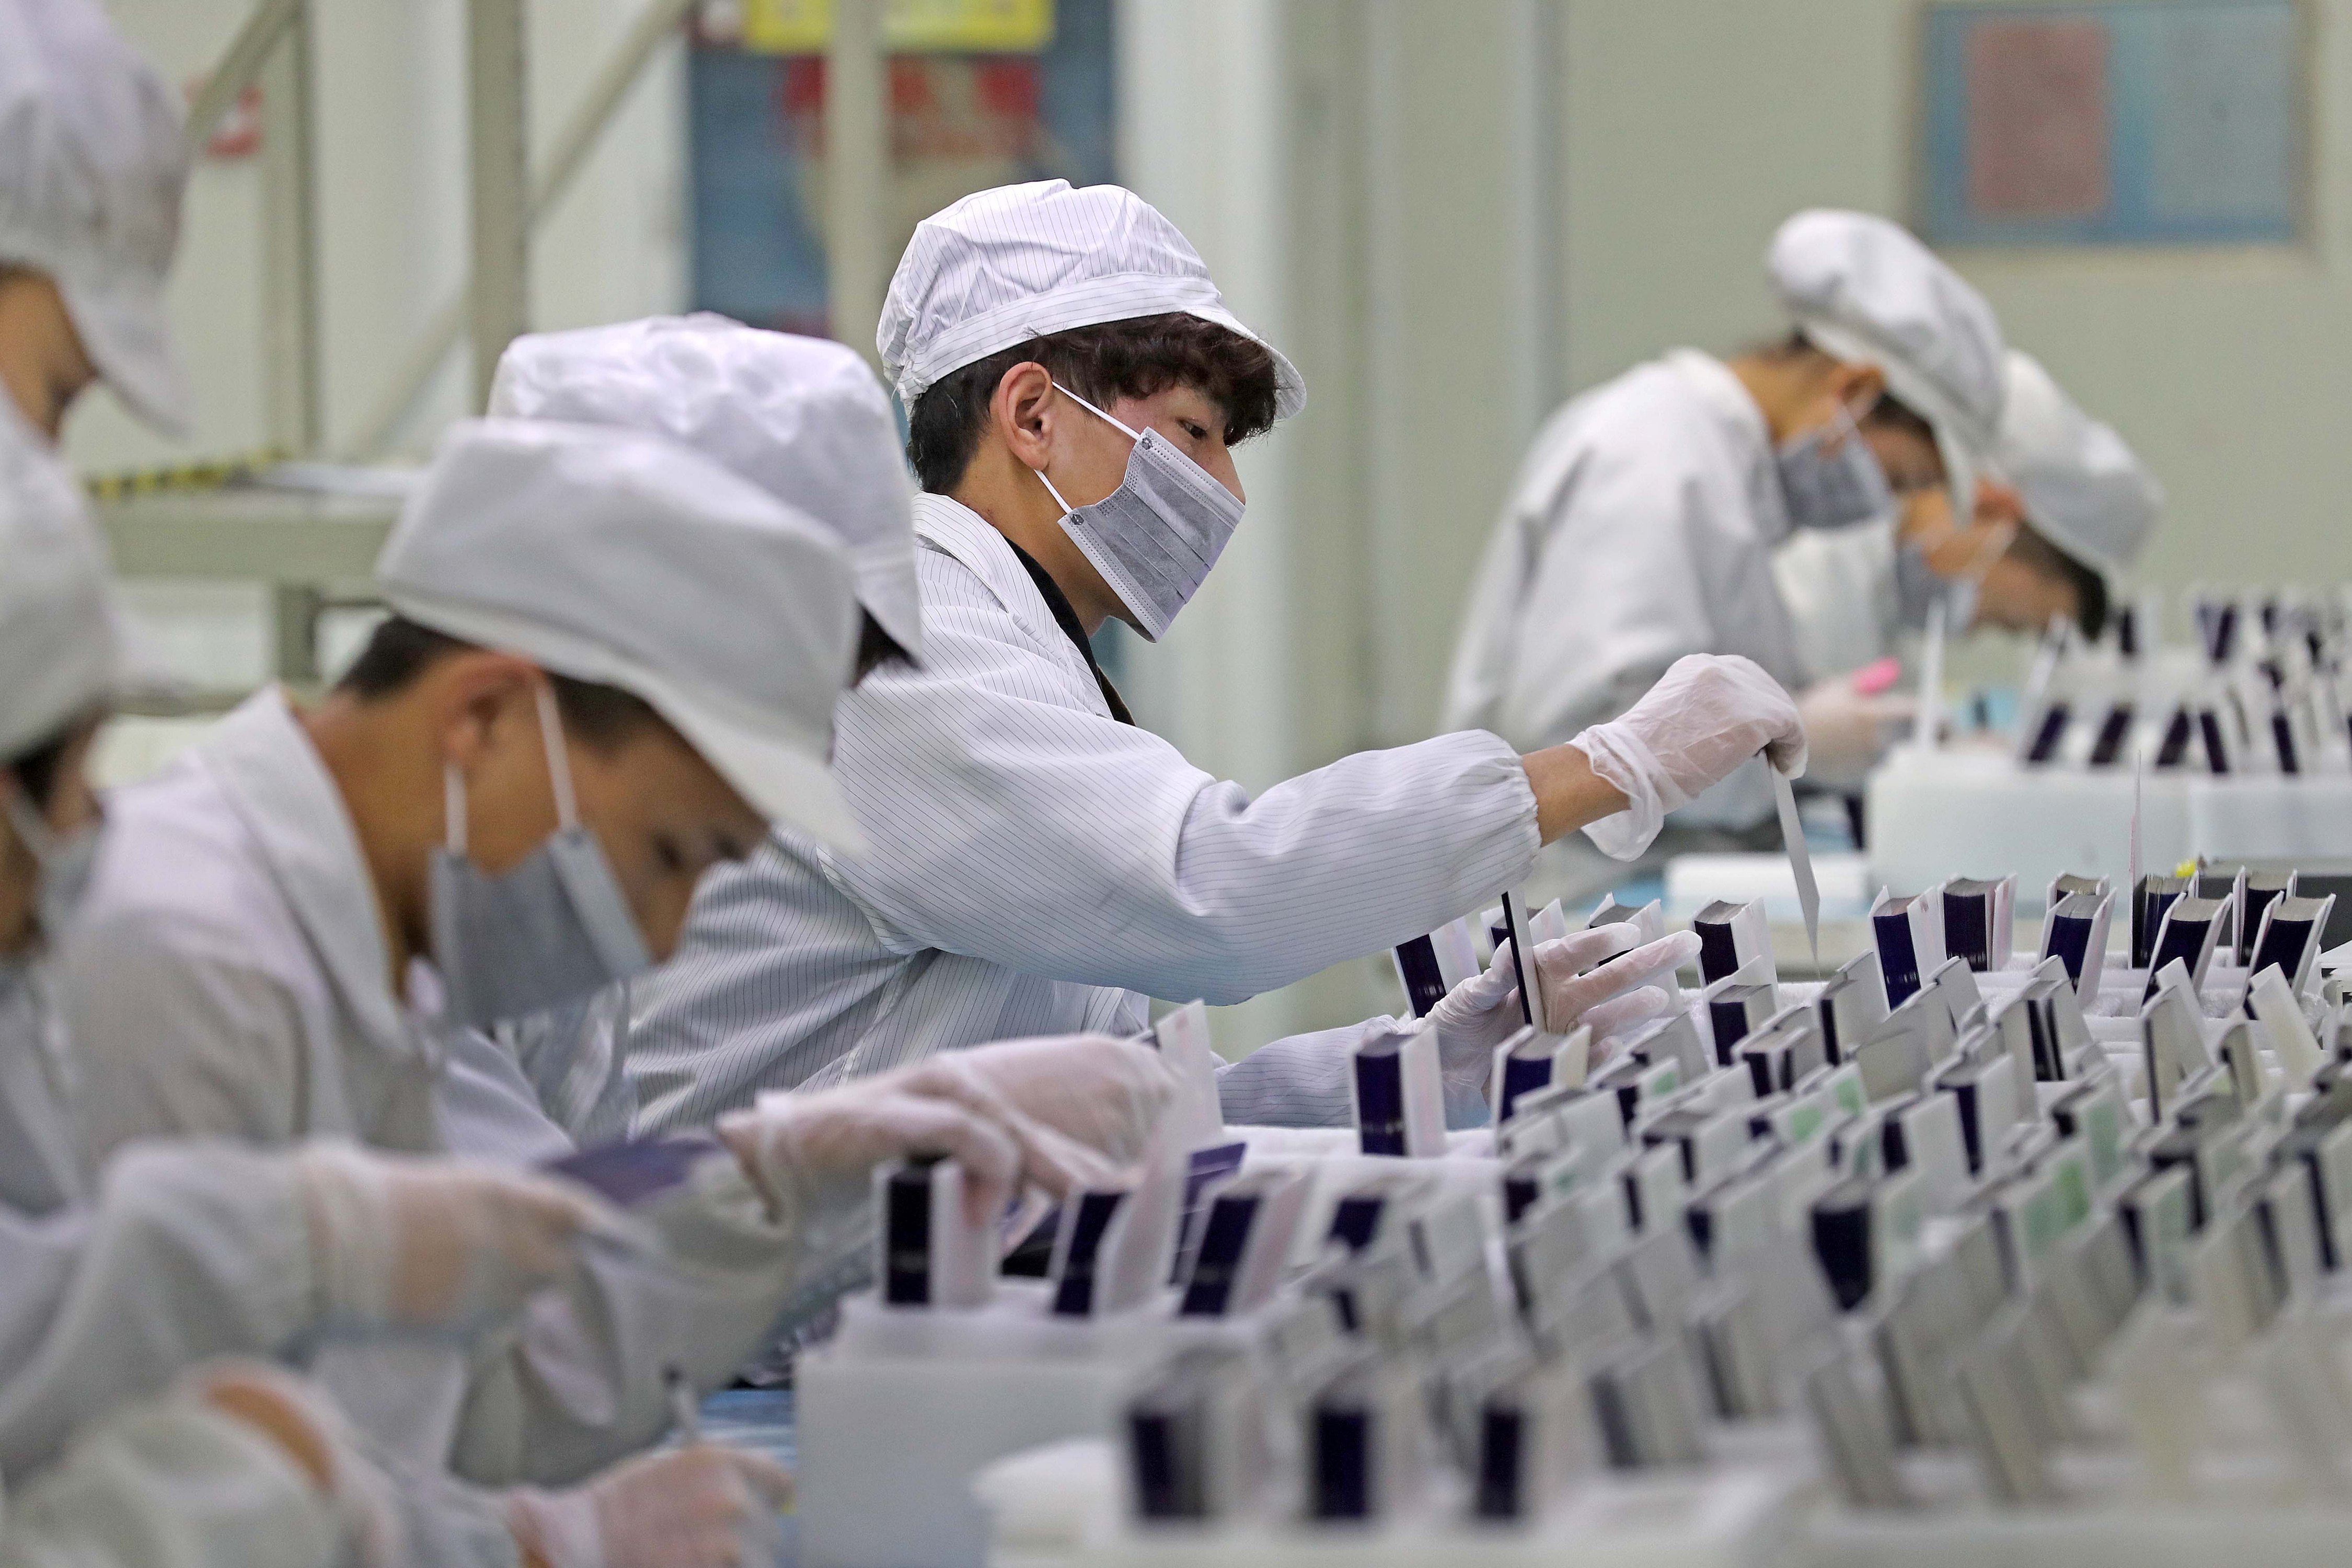 Workers are seen at a production line manufacturing solar photovoltaic components at a factory in Huzhou, Zhejiang